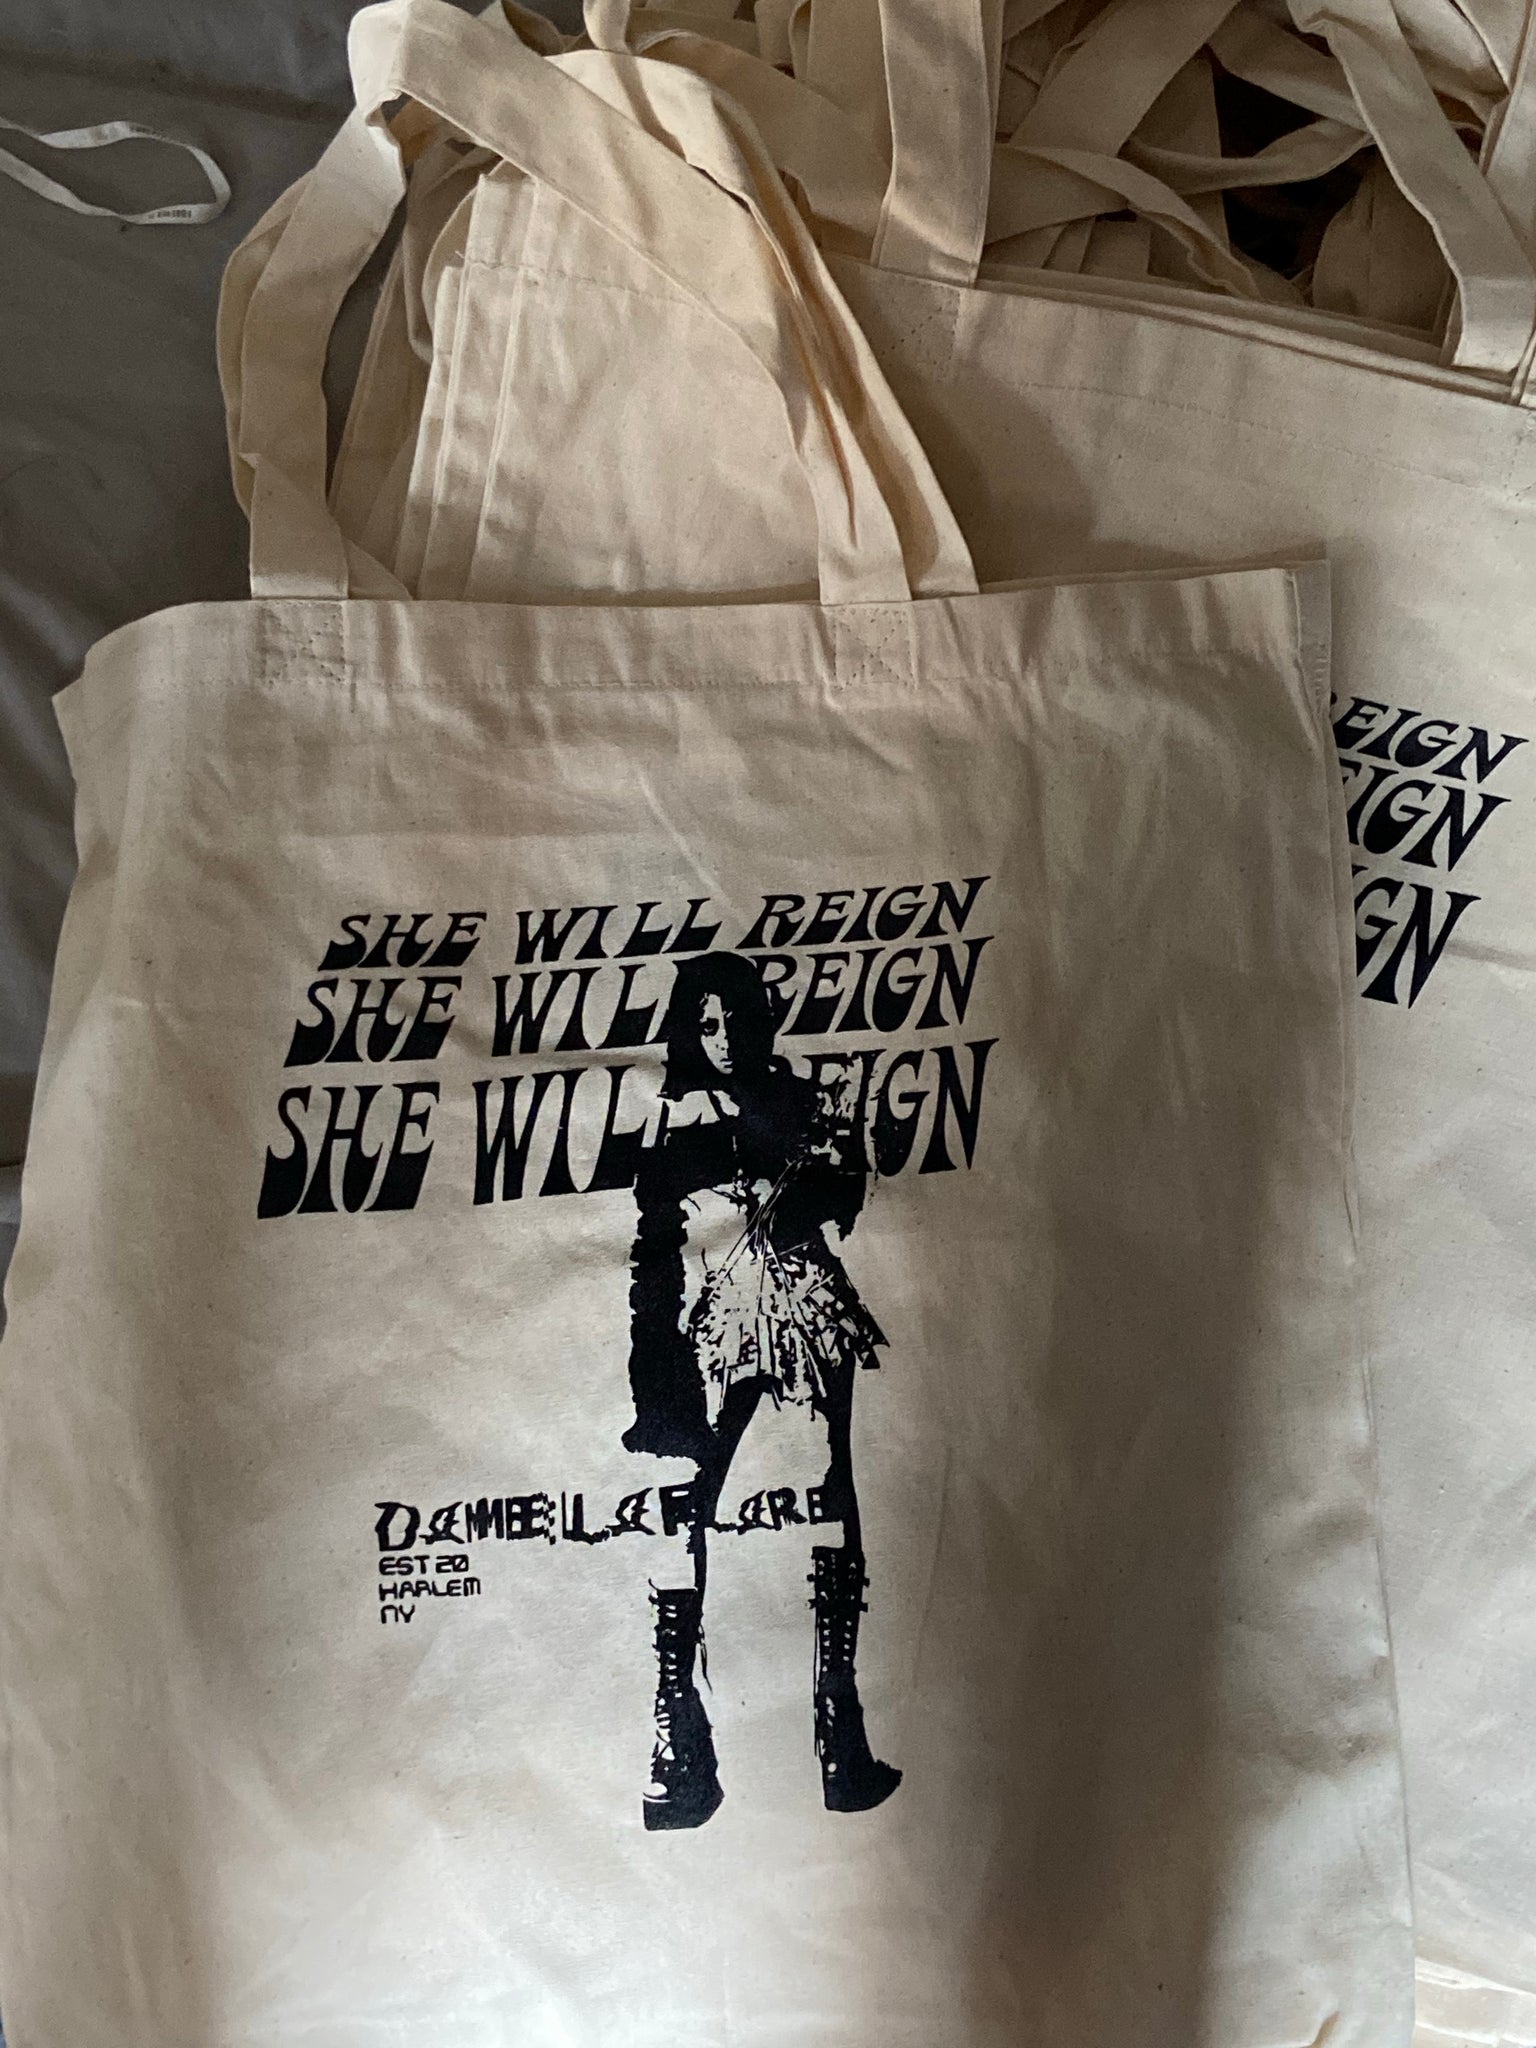 “She Will Reign” Tote